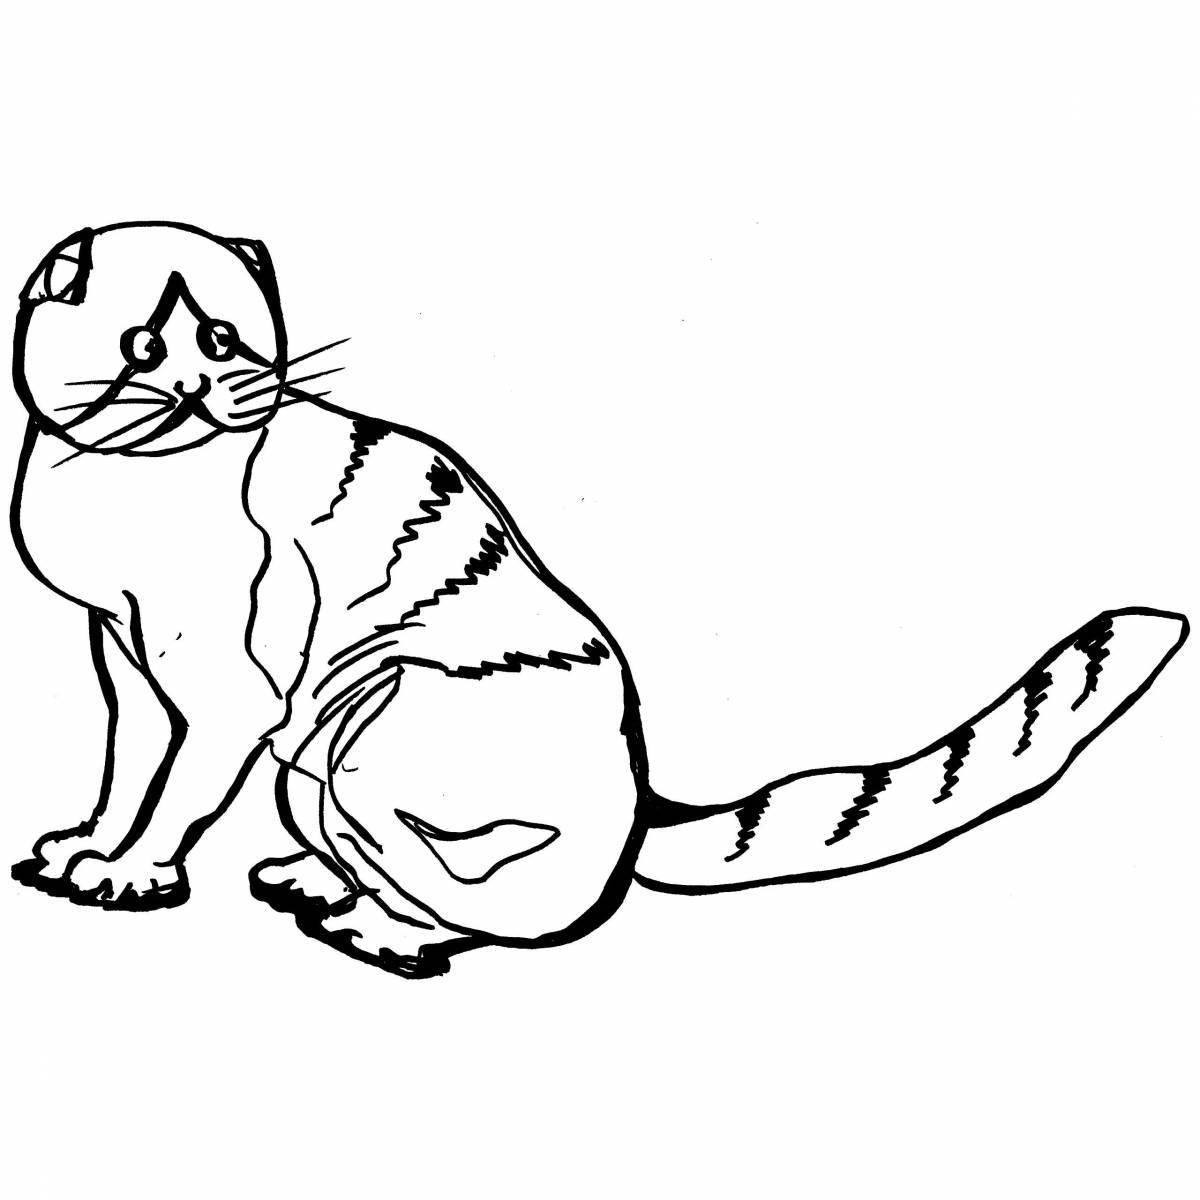 Coloring page playful fold cat